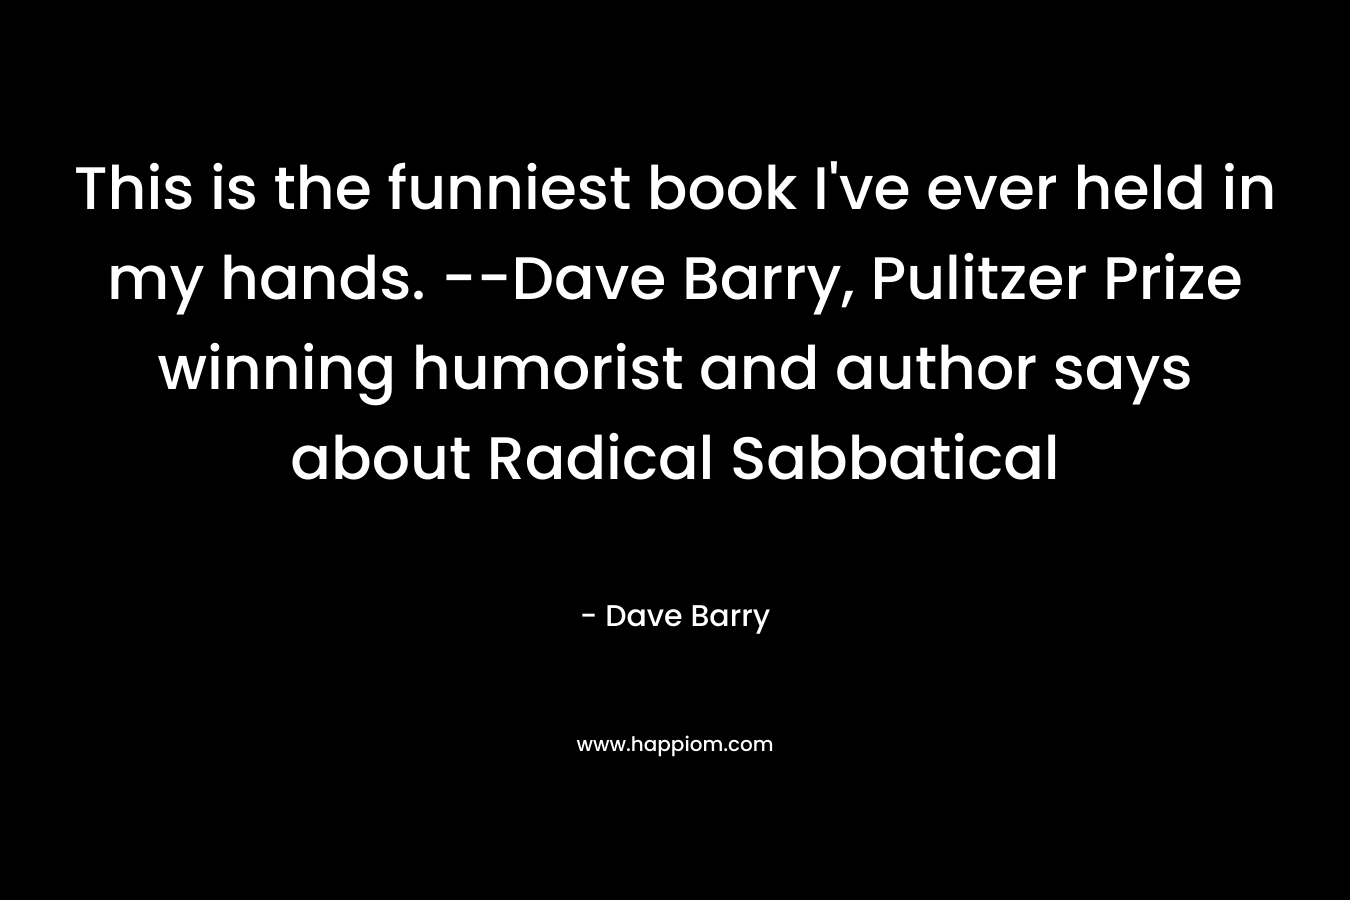 This is the funniest book I've ever held in my hands. --Dave Barry, Pulitzer Prize winning humorist and author says about Radical Sabbatical